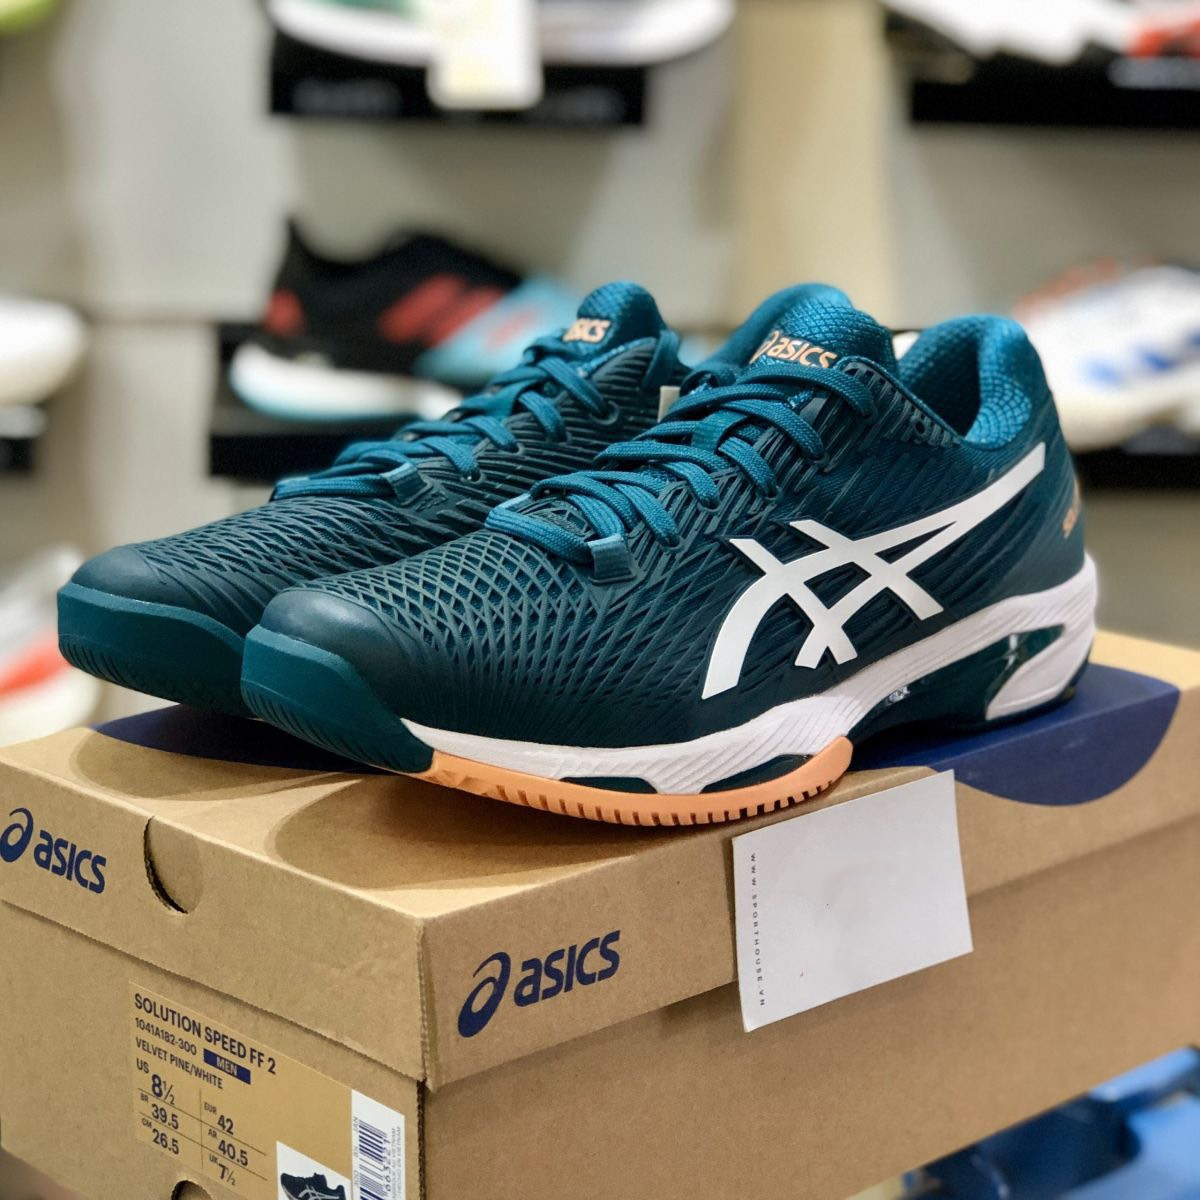 https://admin.thegioigiay.com/upload/product/2023/01/giay-tennis-asics-solution-speed-ff-2-2022-mau-xanh-63d78d1dc7142-30012023162549.png